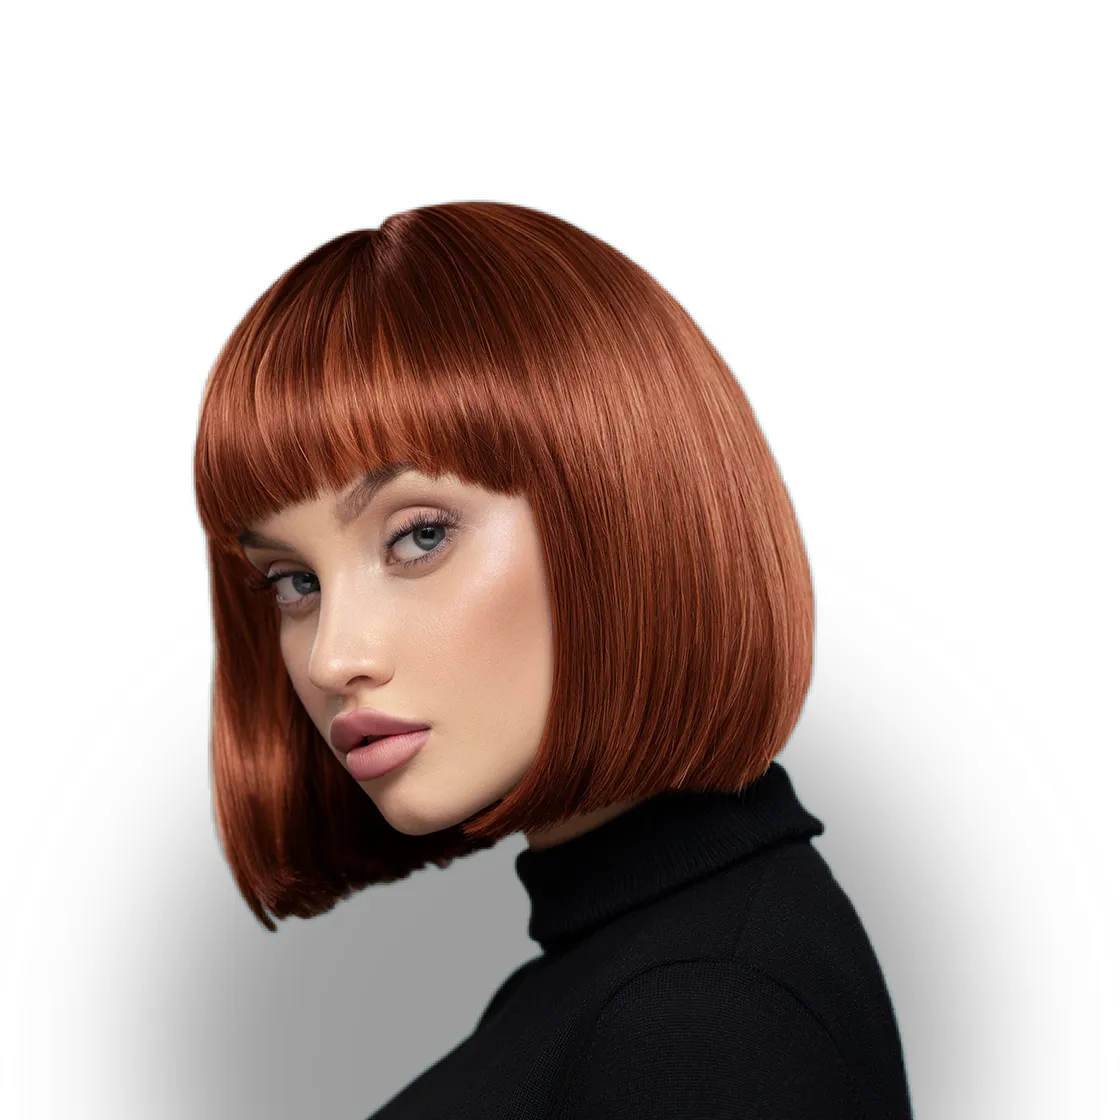 White female model with red hair cut into a bob with bangs wearing a black turtle neck top posing against white background.